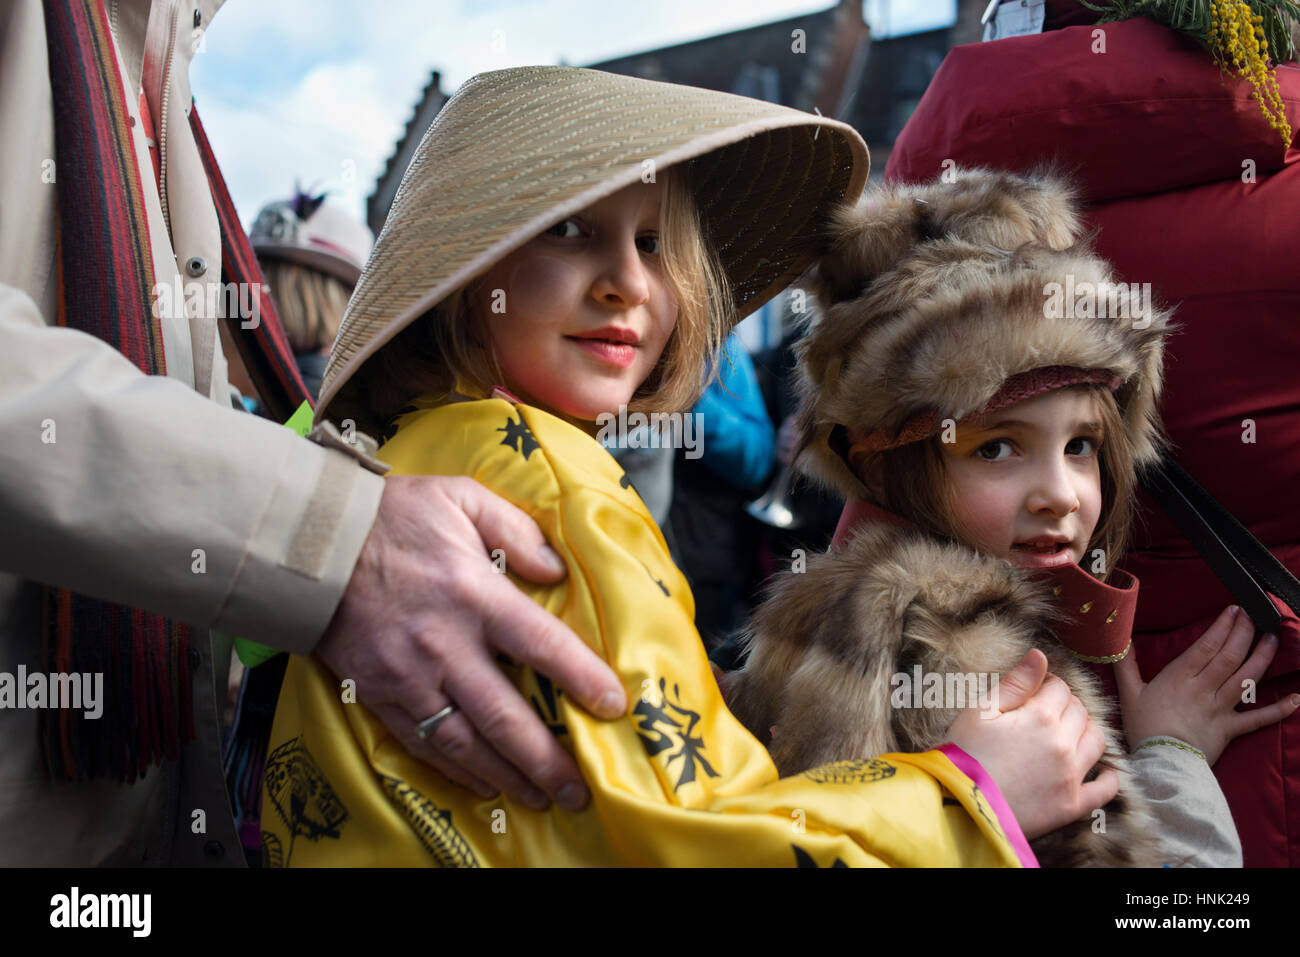 Music, dance, party and costumes in Binche Carnival. Ancient and representative cultural event of Wallonia, Belgium. Stock Photo